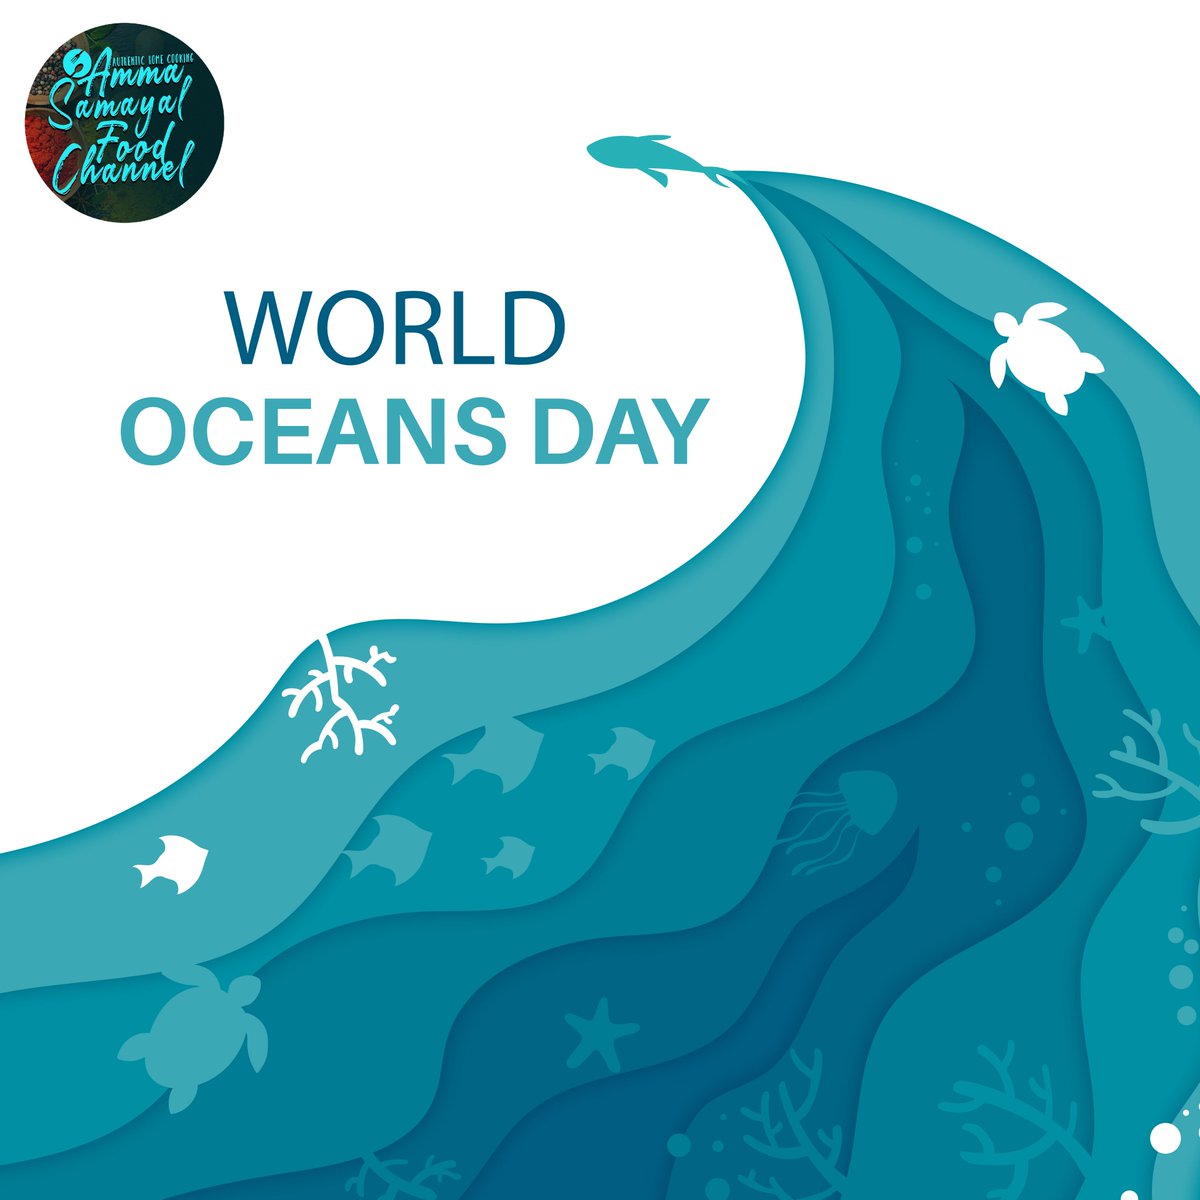 Save the Sea to See the Future. Everyone, have a mindful World Oceans Day!

#worldoceanday #ocean #worldoceansday #oceanlife #sea #oceans #oceanday #nature #protecttheocean #banthebead #climateaction #environment #plasticpollution #saveourseas #photography #climatechange